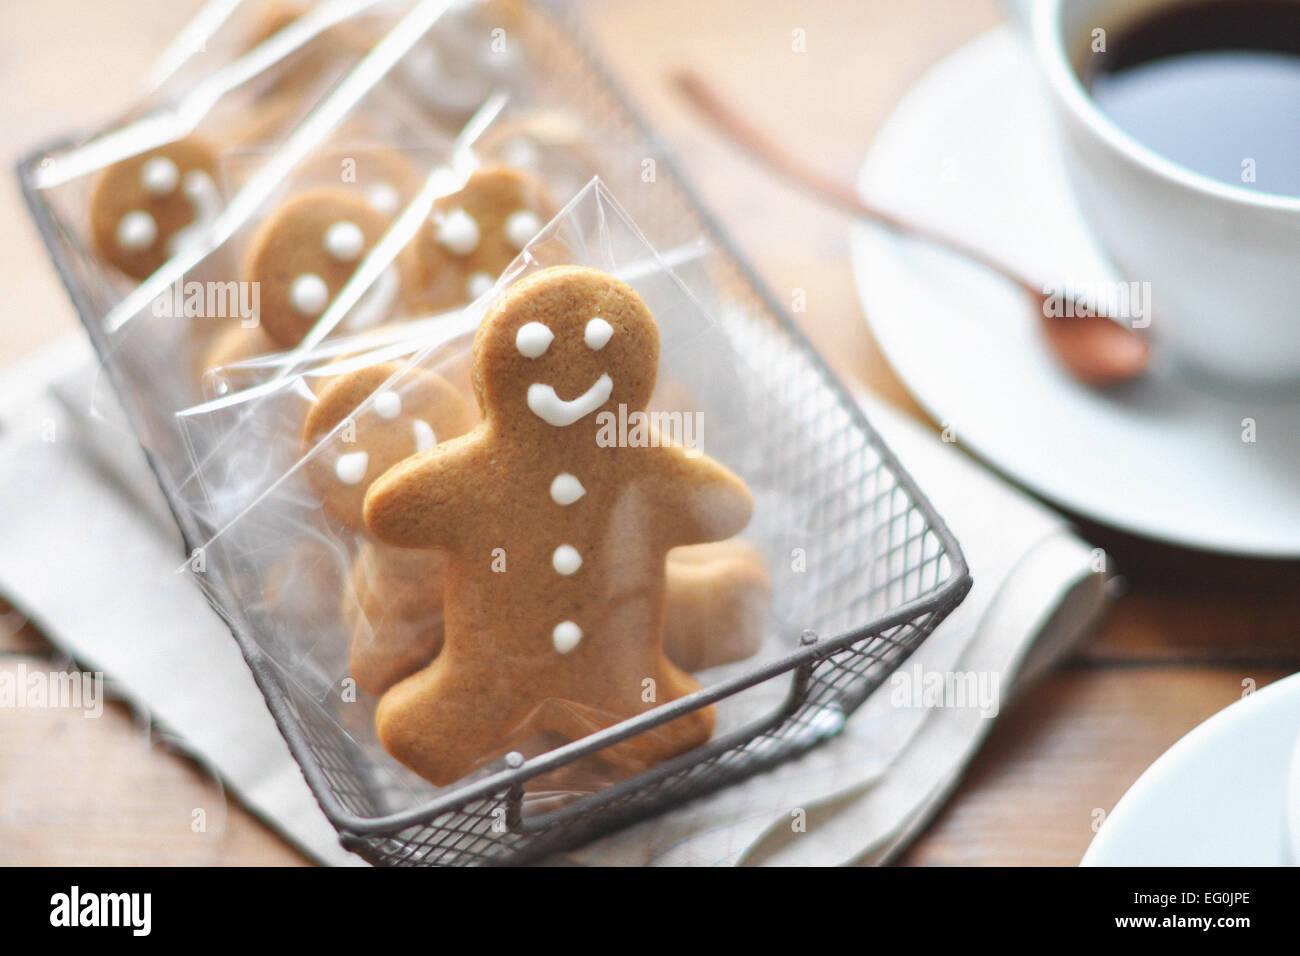 Gingerbread men in a row and coffee on table Stock Photo